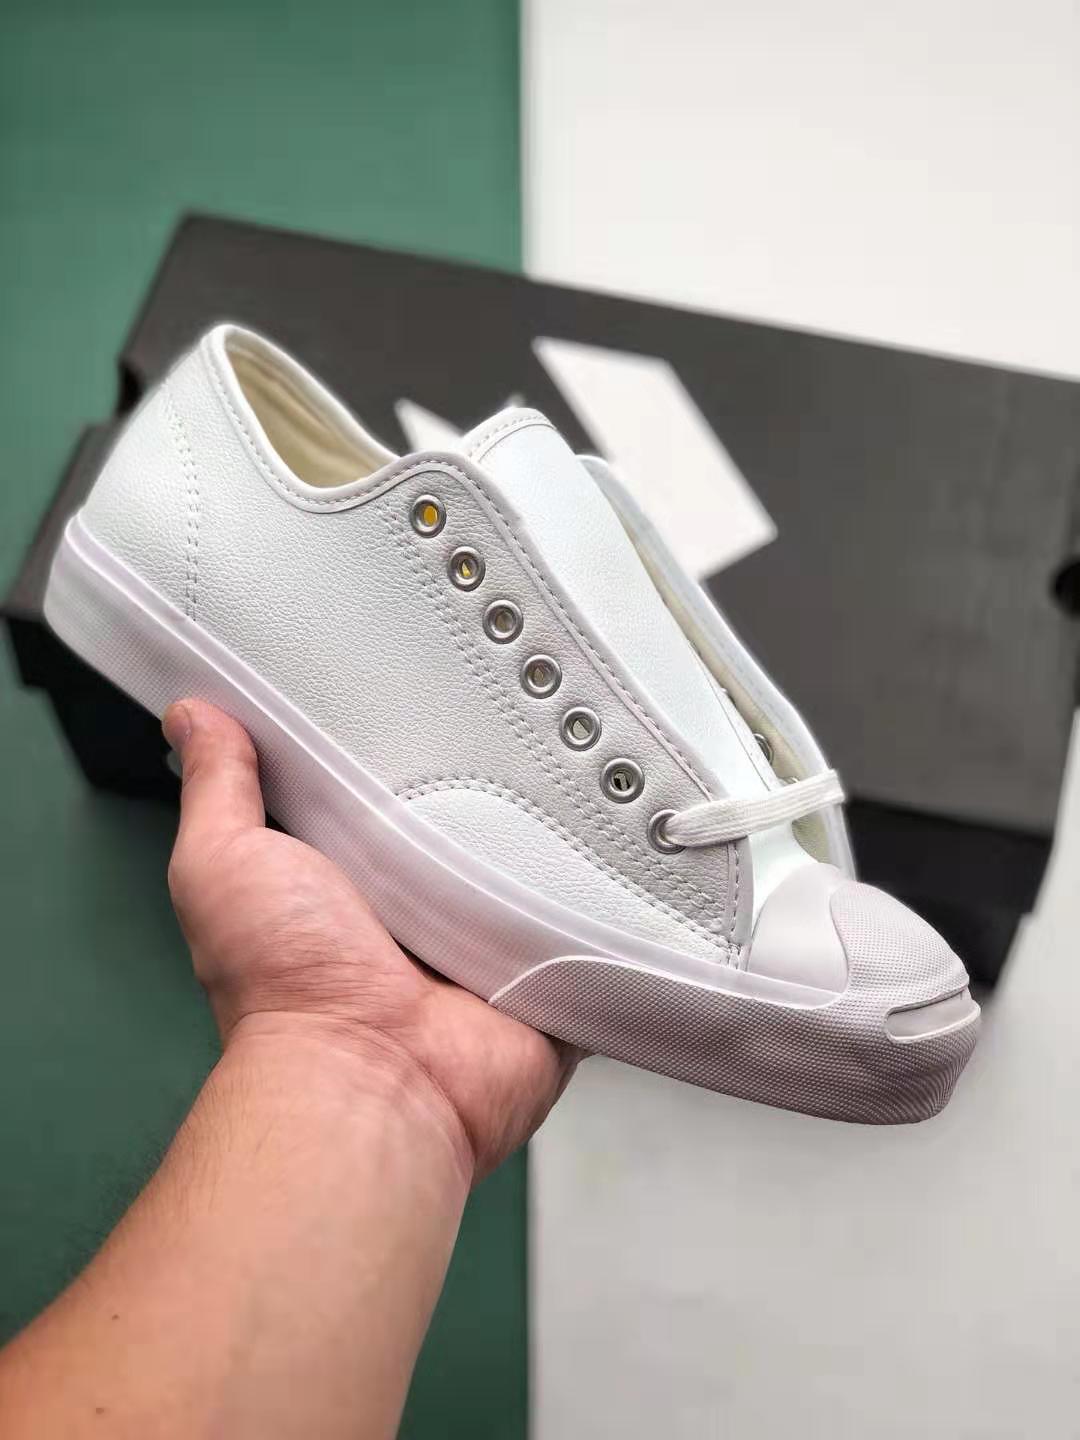 Converse Jack Purcell 'White' 164225C - Classic Style with Timeless Appeal